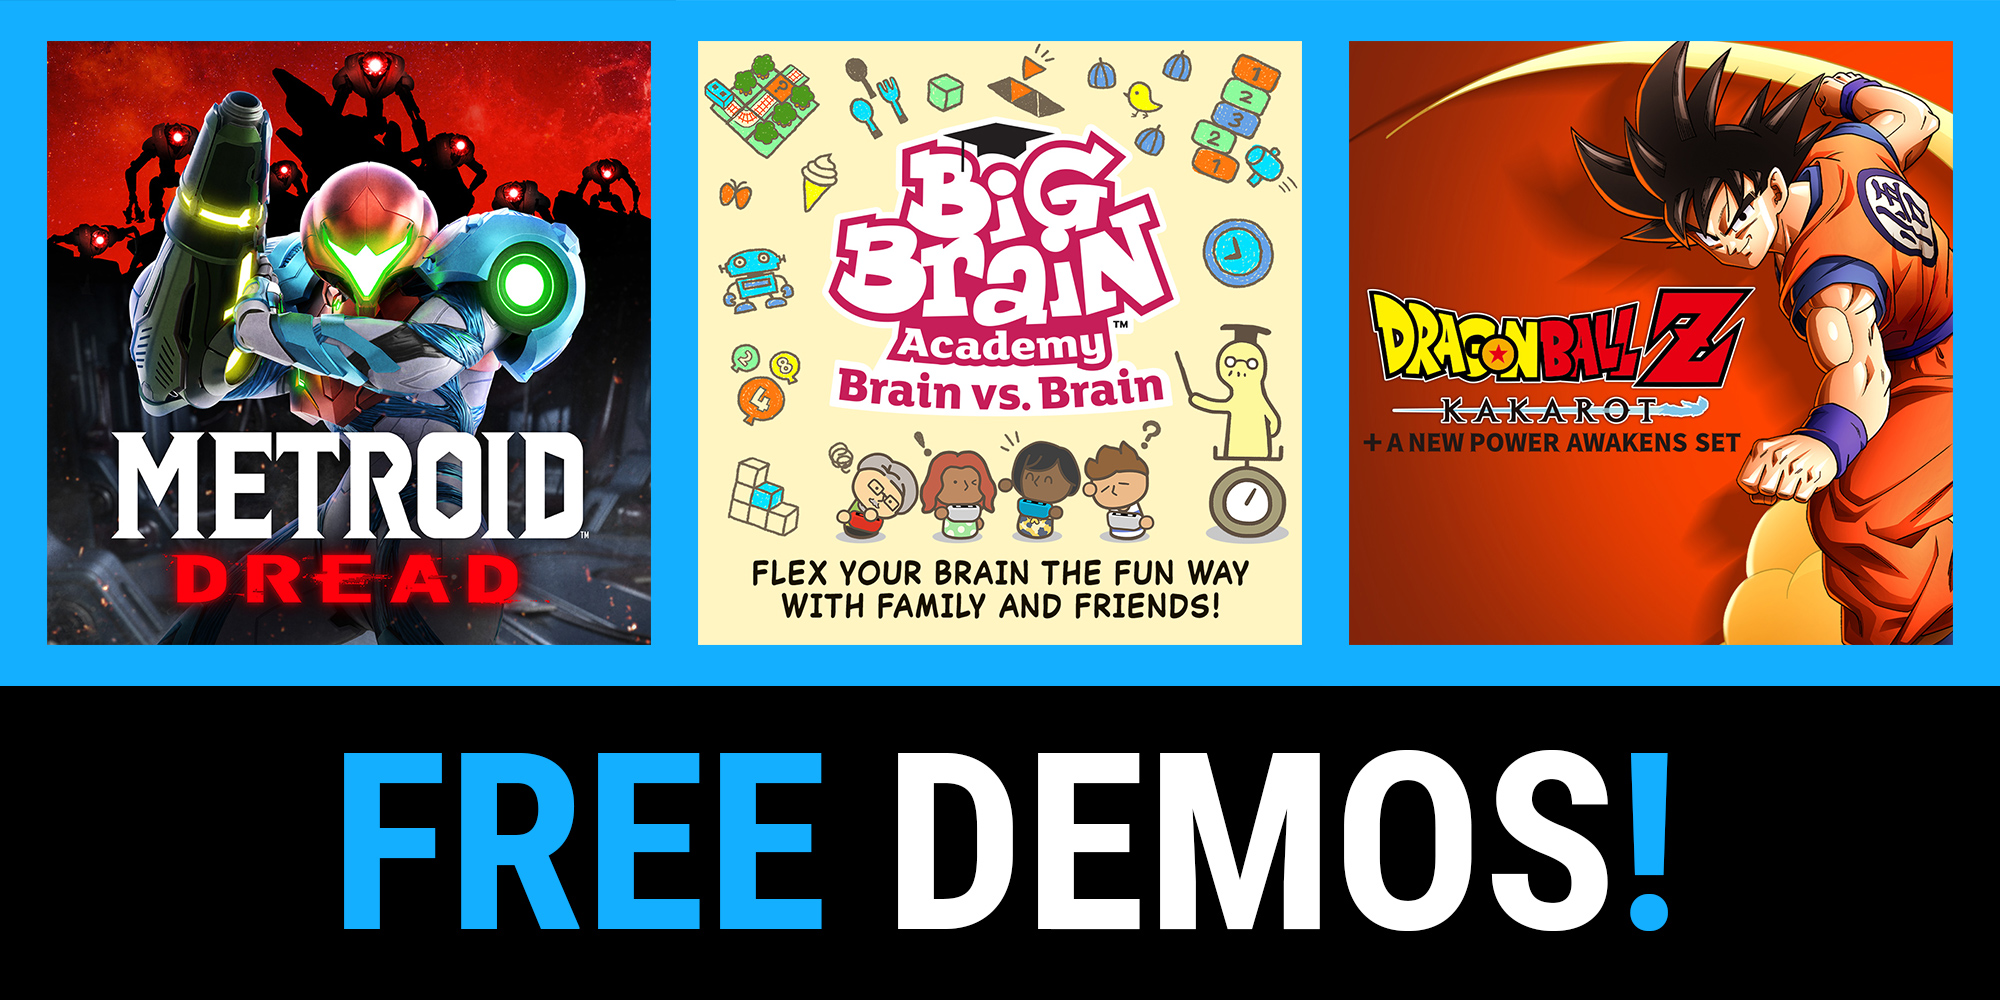 Try Metroid Dread, Big Brain Academy: Brain vs. Brain, and more games for free on Nintendo Switch!